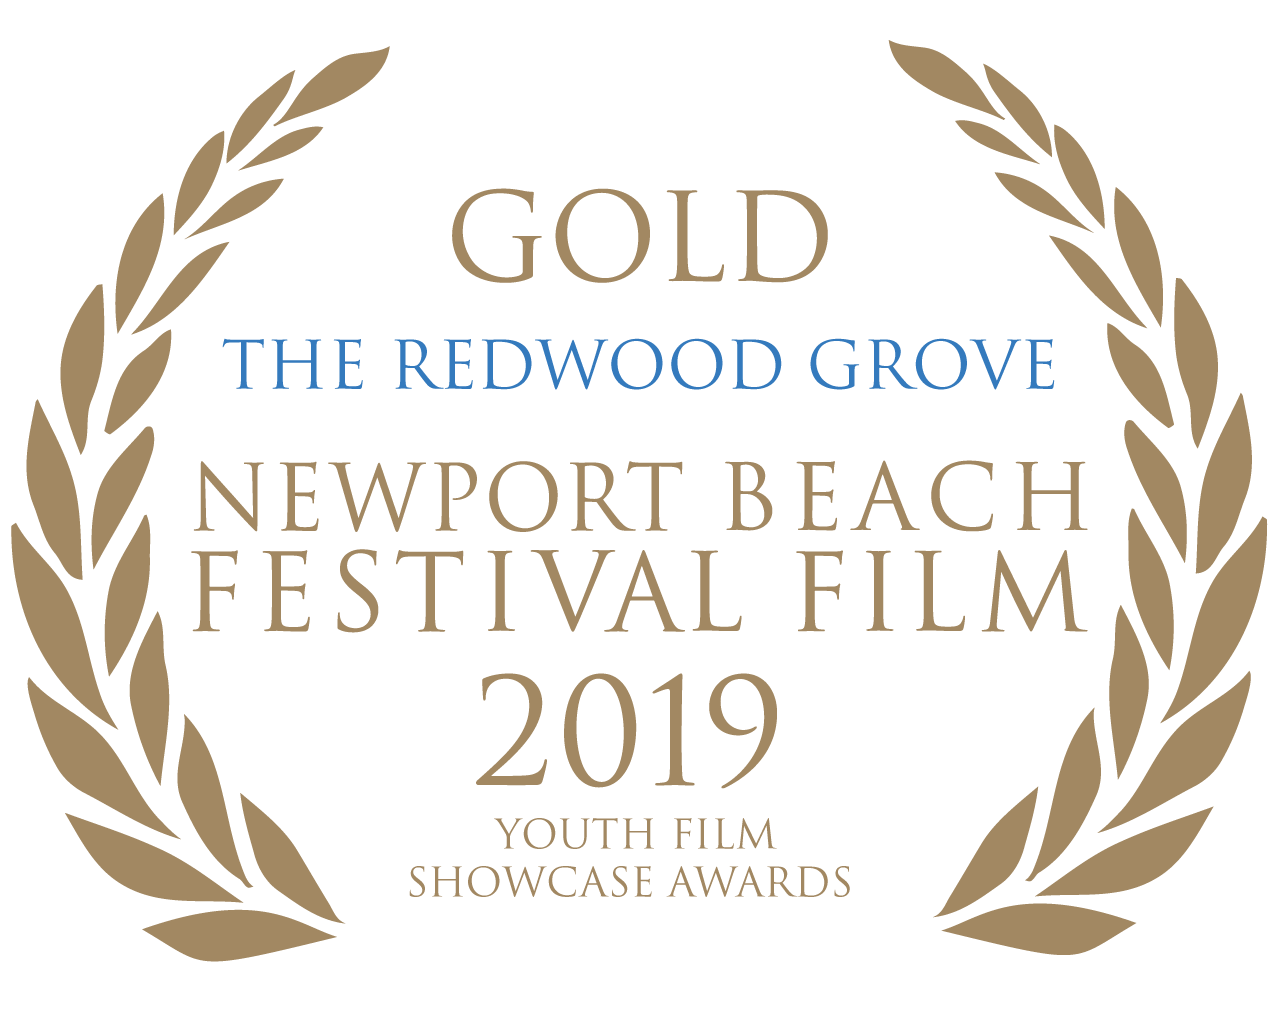 Youth-Film-Showcase-Awards-The-Redwood-Grove